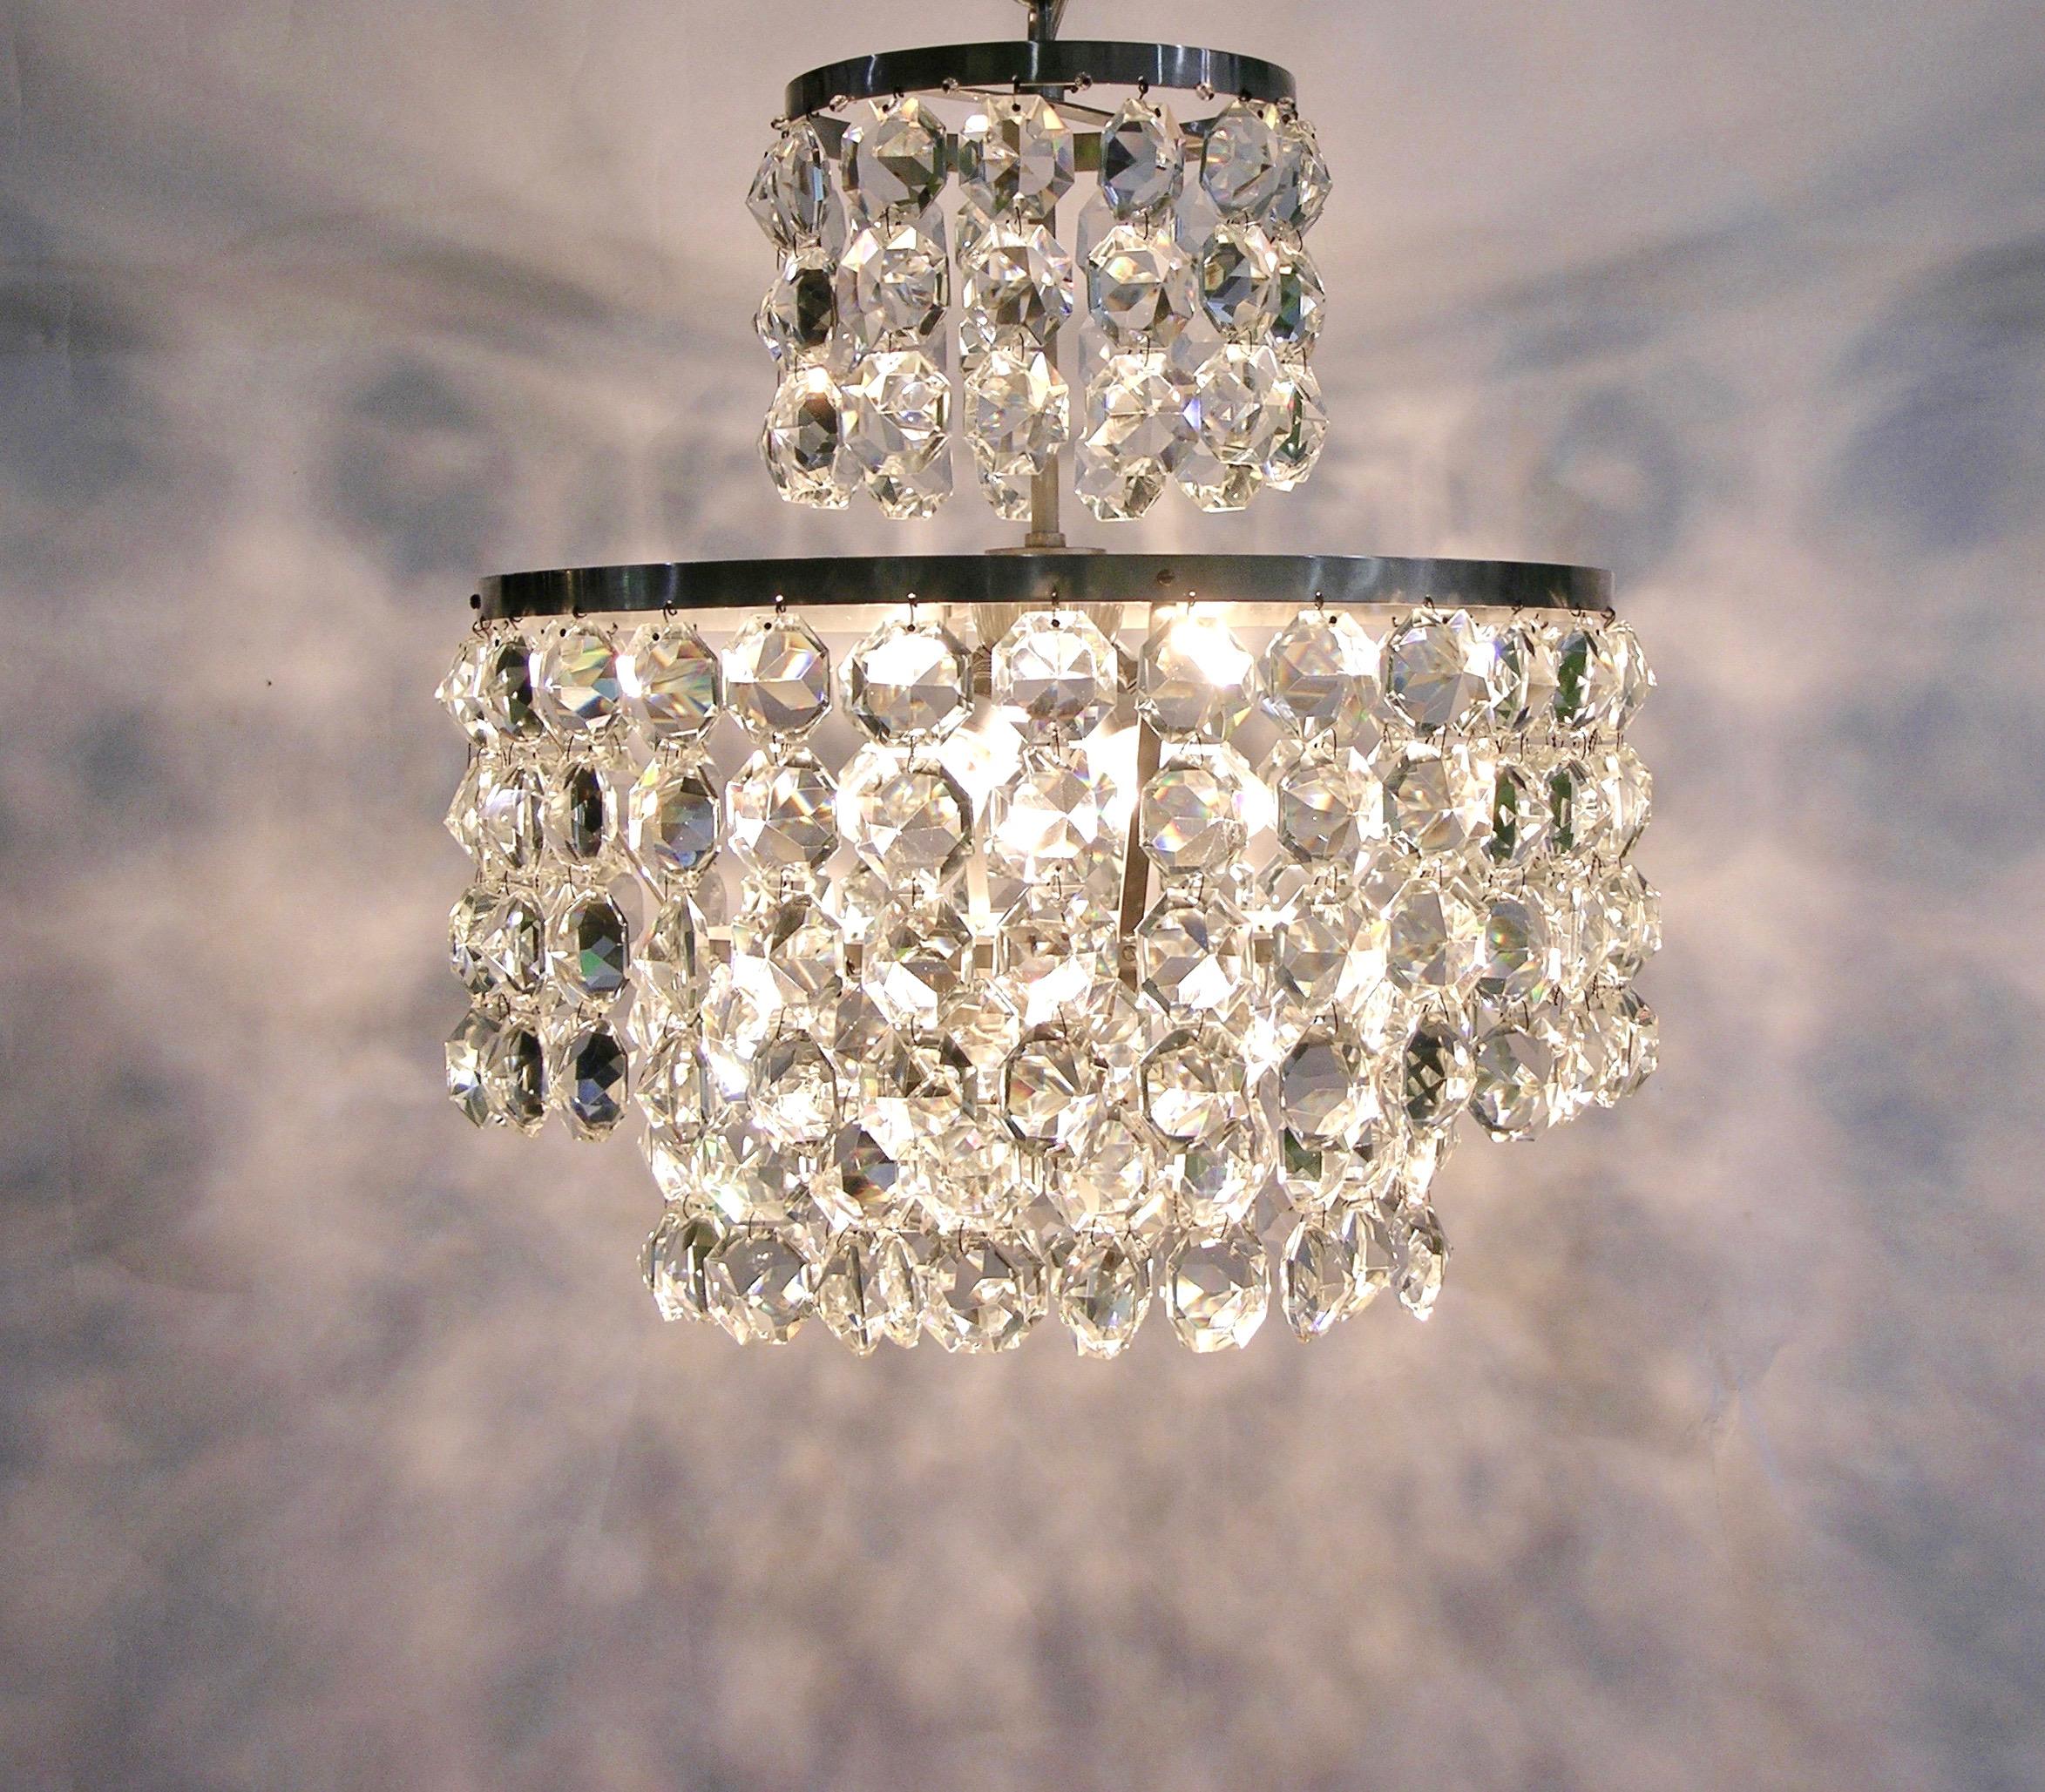 1950s Italian Vintage Satin Chrome and Clear Crystal Murano Glass Chandelier For Sale 4